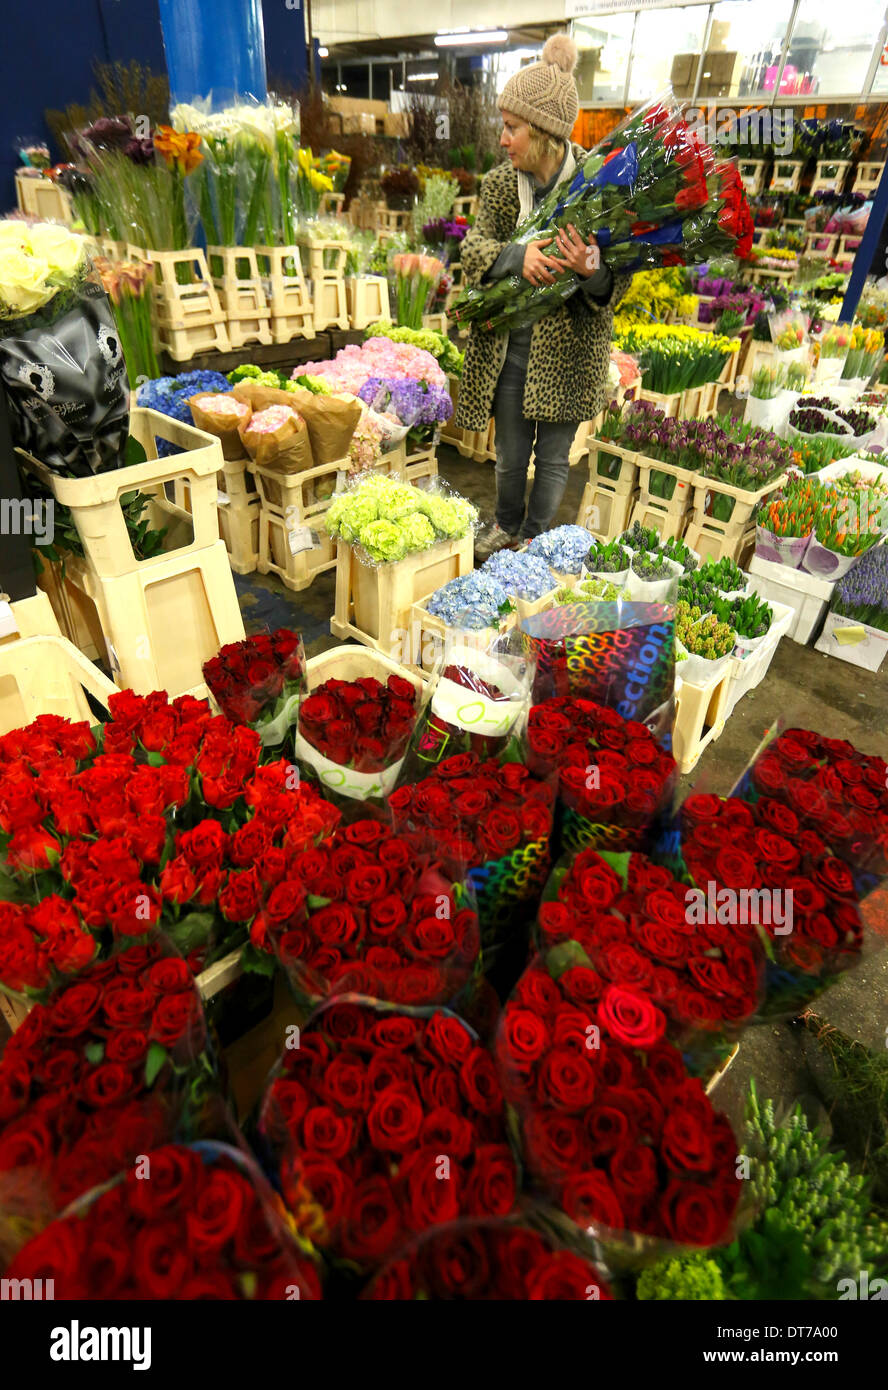 London, UK. 10th February 2014. 10/02/14    Florist, Nicky Doodson selects some red roses.    With only four days until Valentine's Day, market traders begin selling their blooms at 4:00 am on the busiest week of the year at New Covent Garden Flower Market in London. Credit:  Joanne Roberts/Alamy Live News Stock Photo